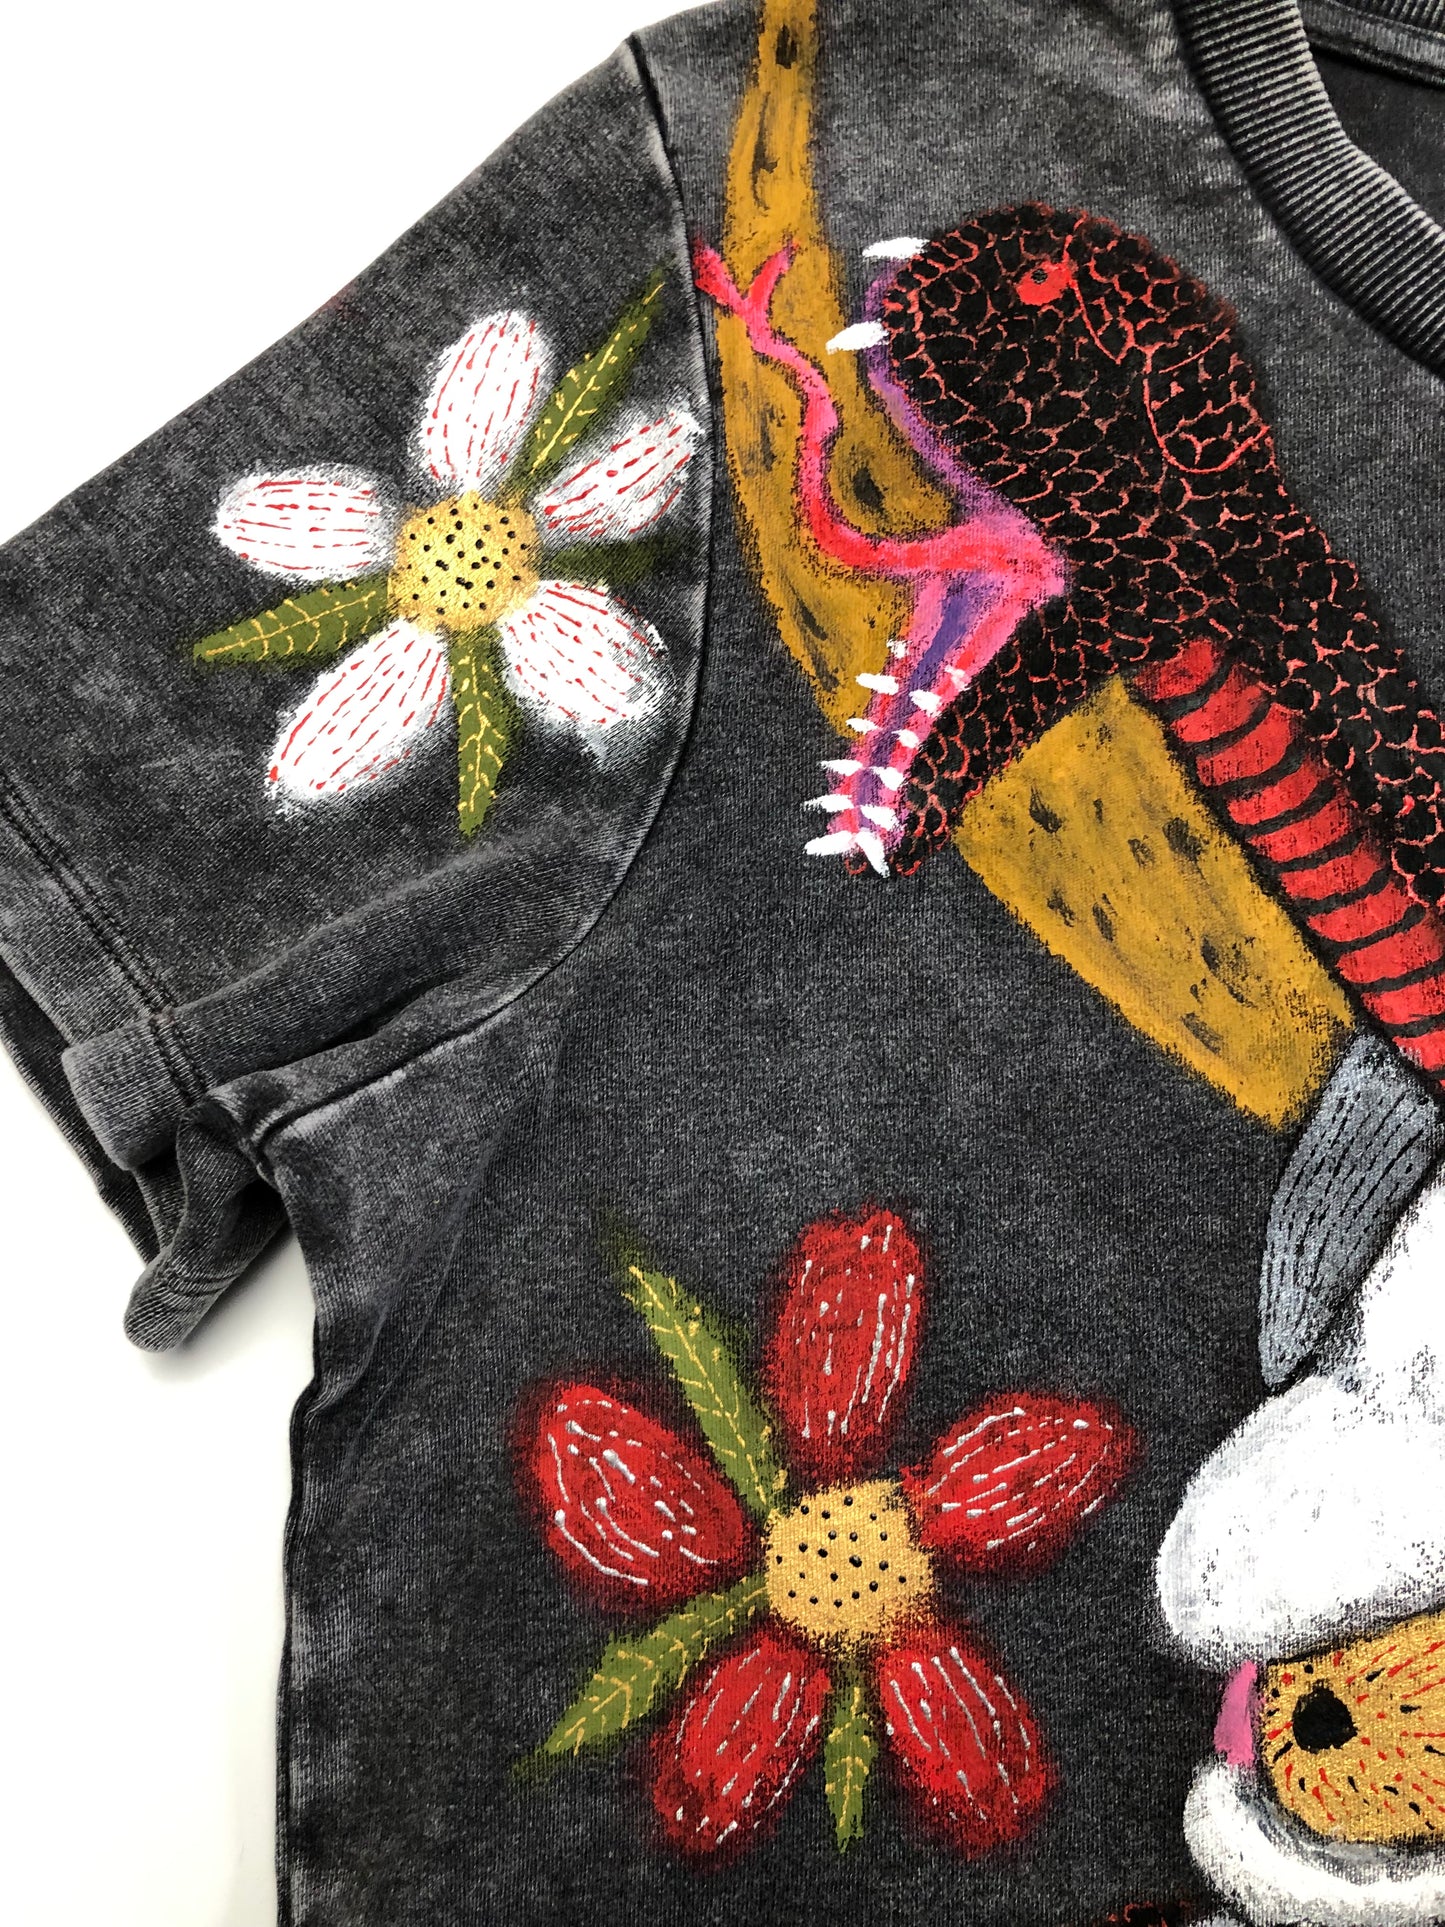 In detail the sleeve of a T -shirt with a snake and a floral design